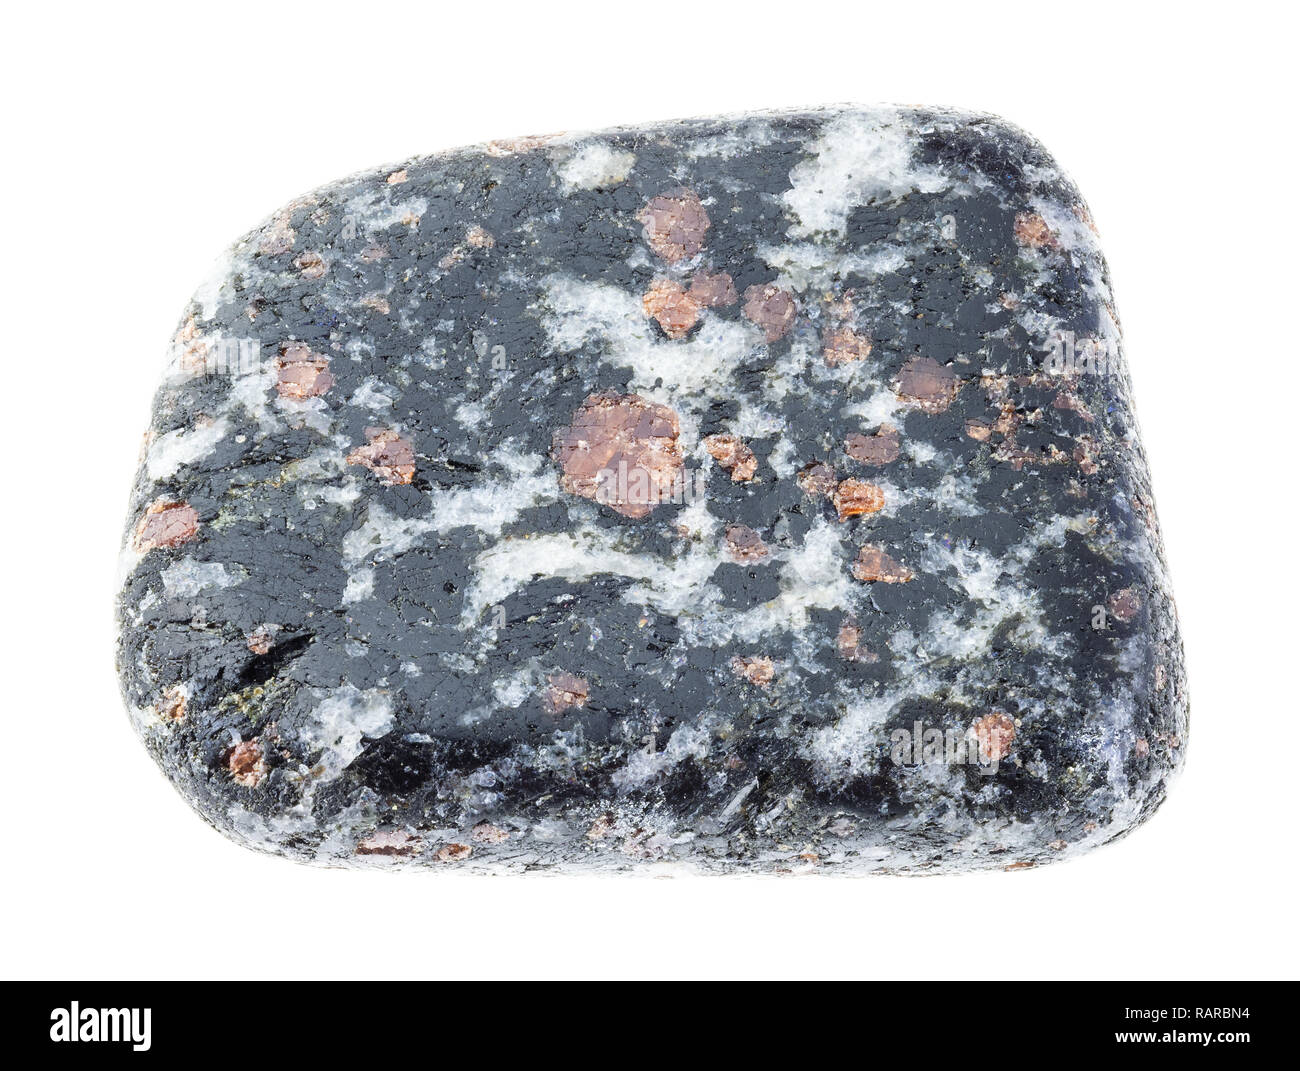 macro photography of natural mineral from geological collection - Garnet crystals in polished Hornblende (amphibole) stone on white background Stock Photo